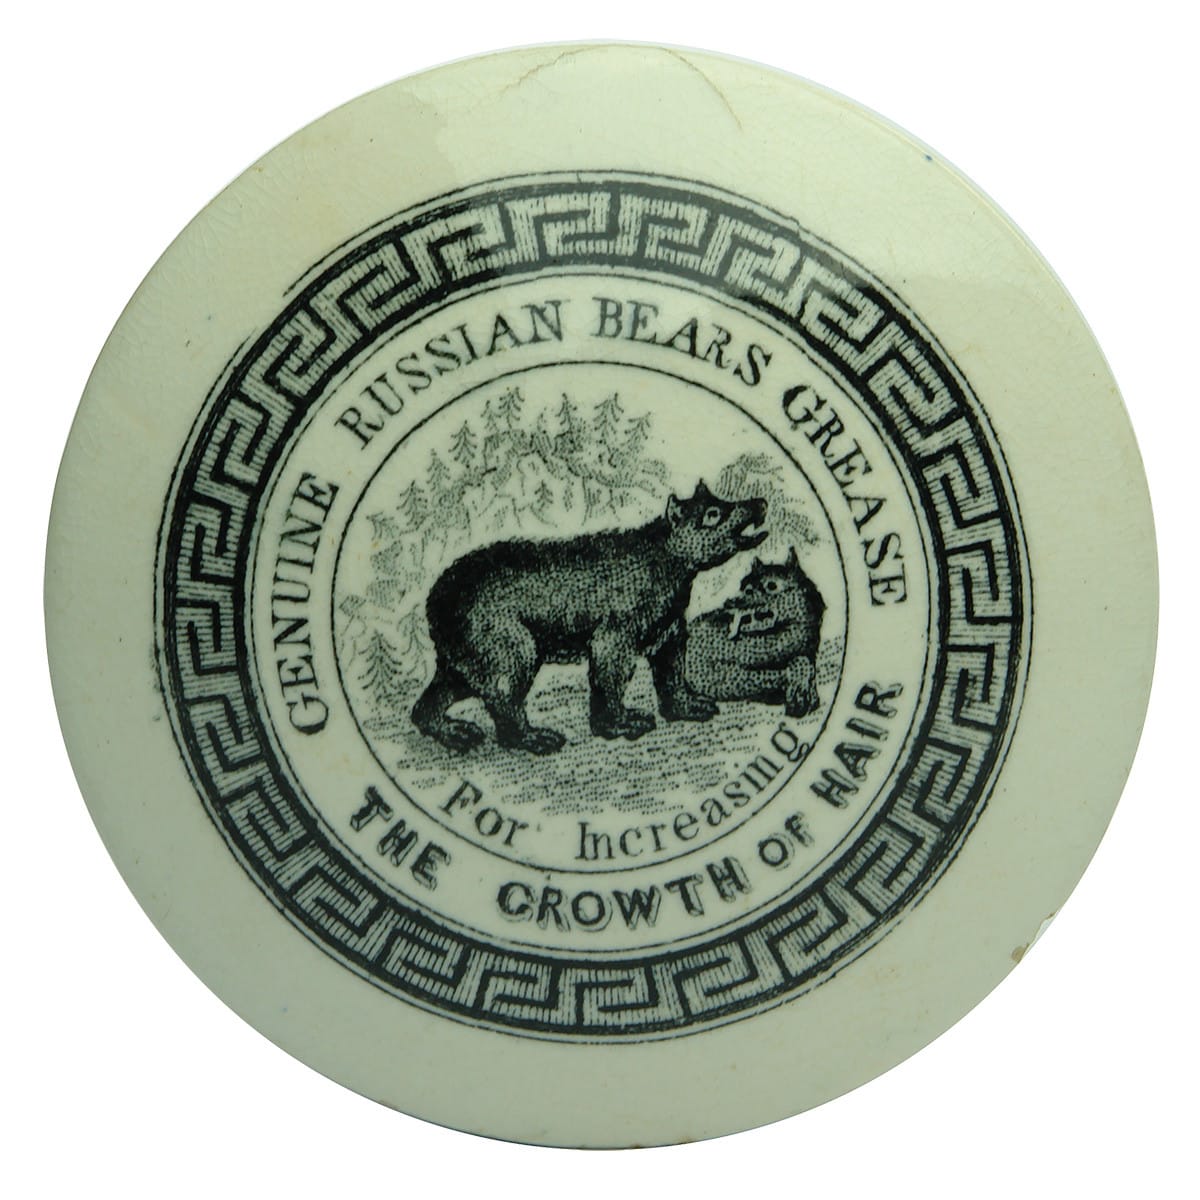 Pot Lid. Genuine Russian Bears Grease. Large domed lid.